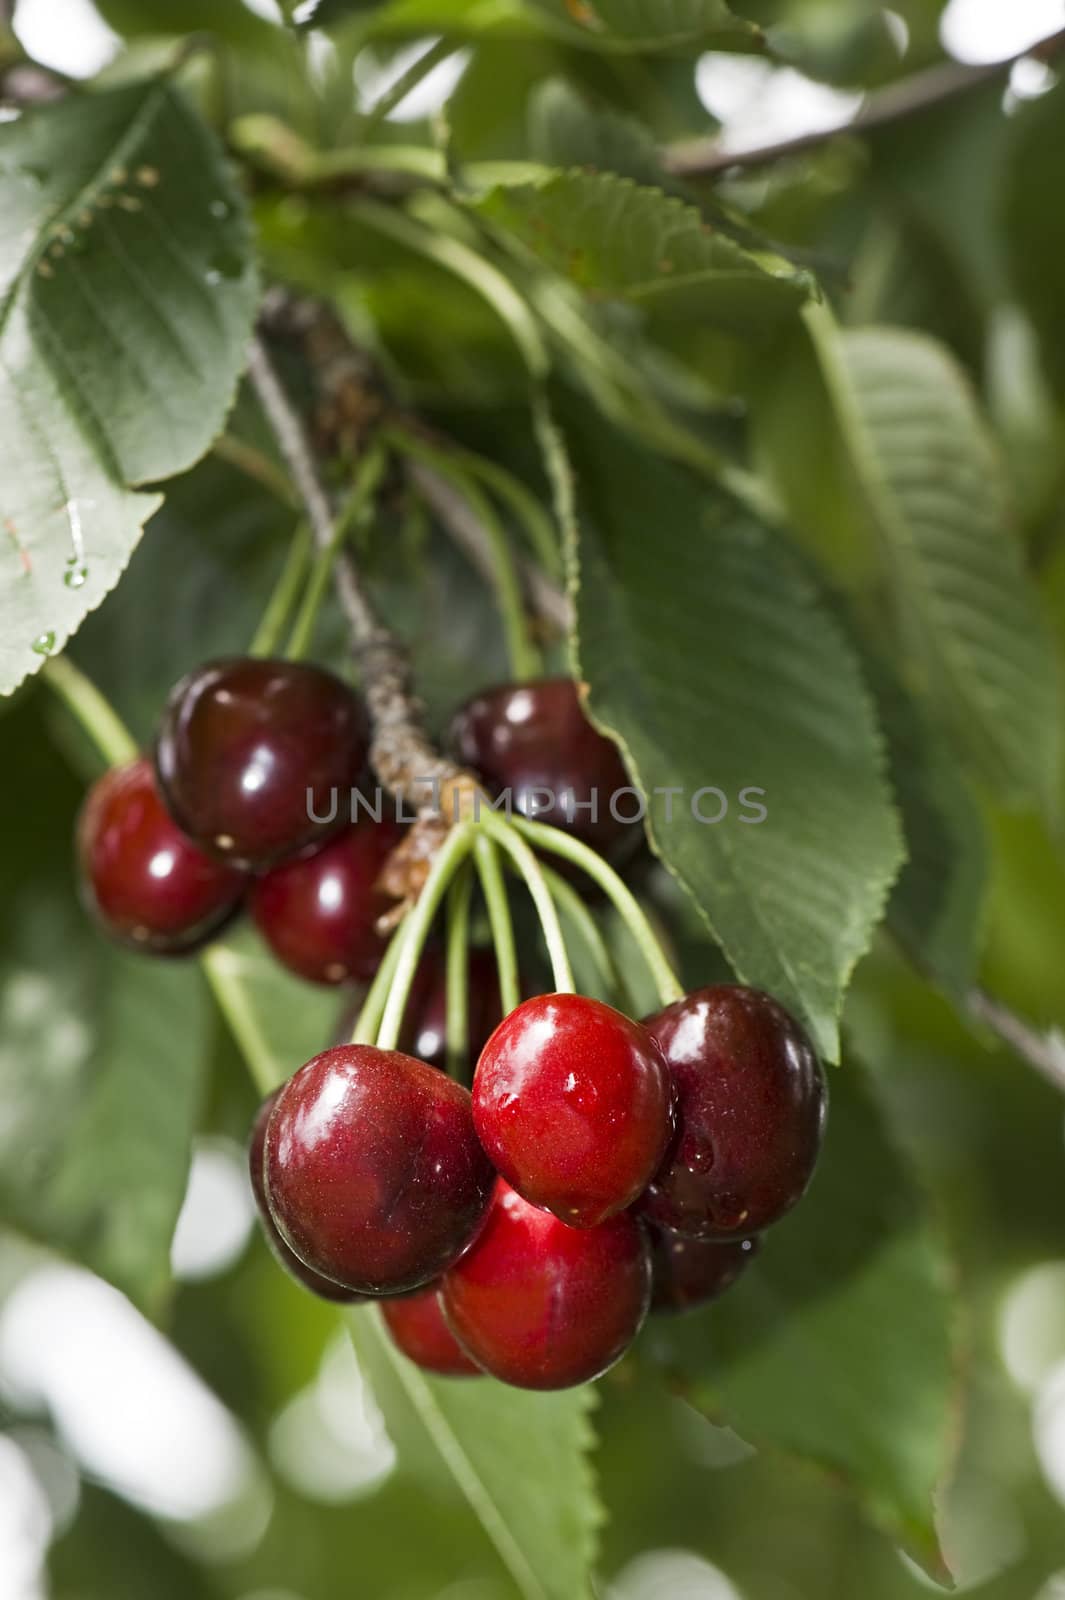 Cherries in a bunch on the tree